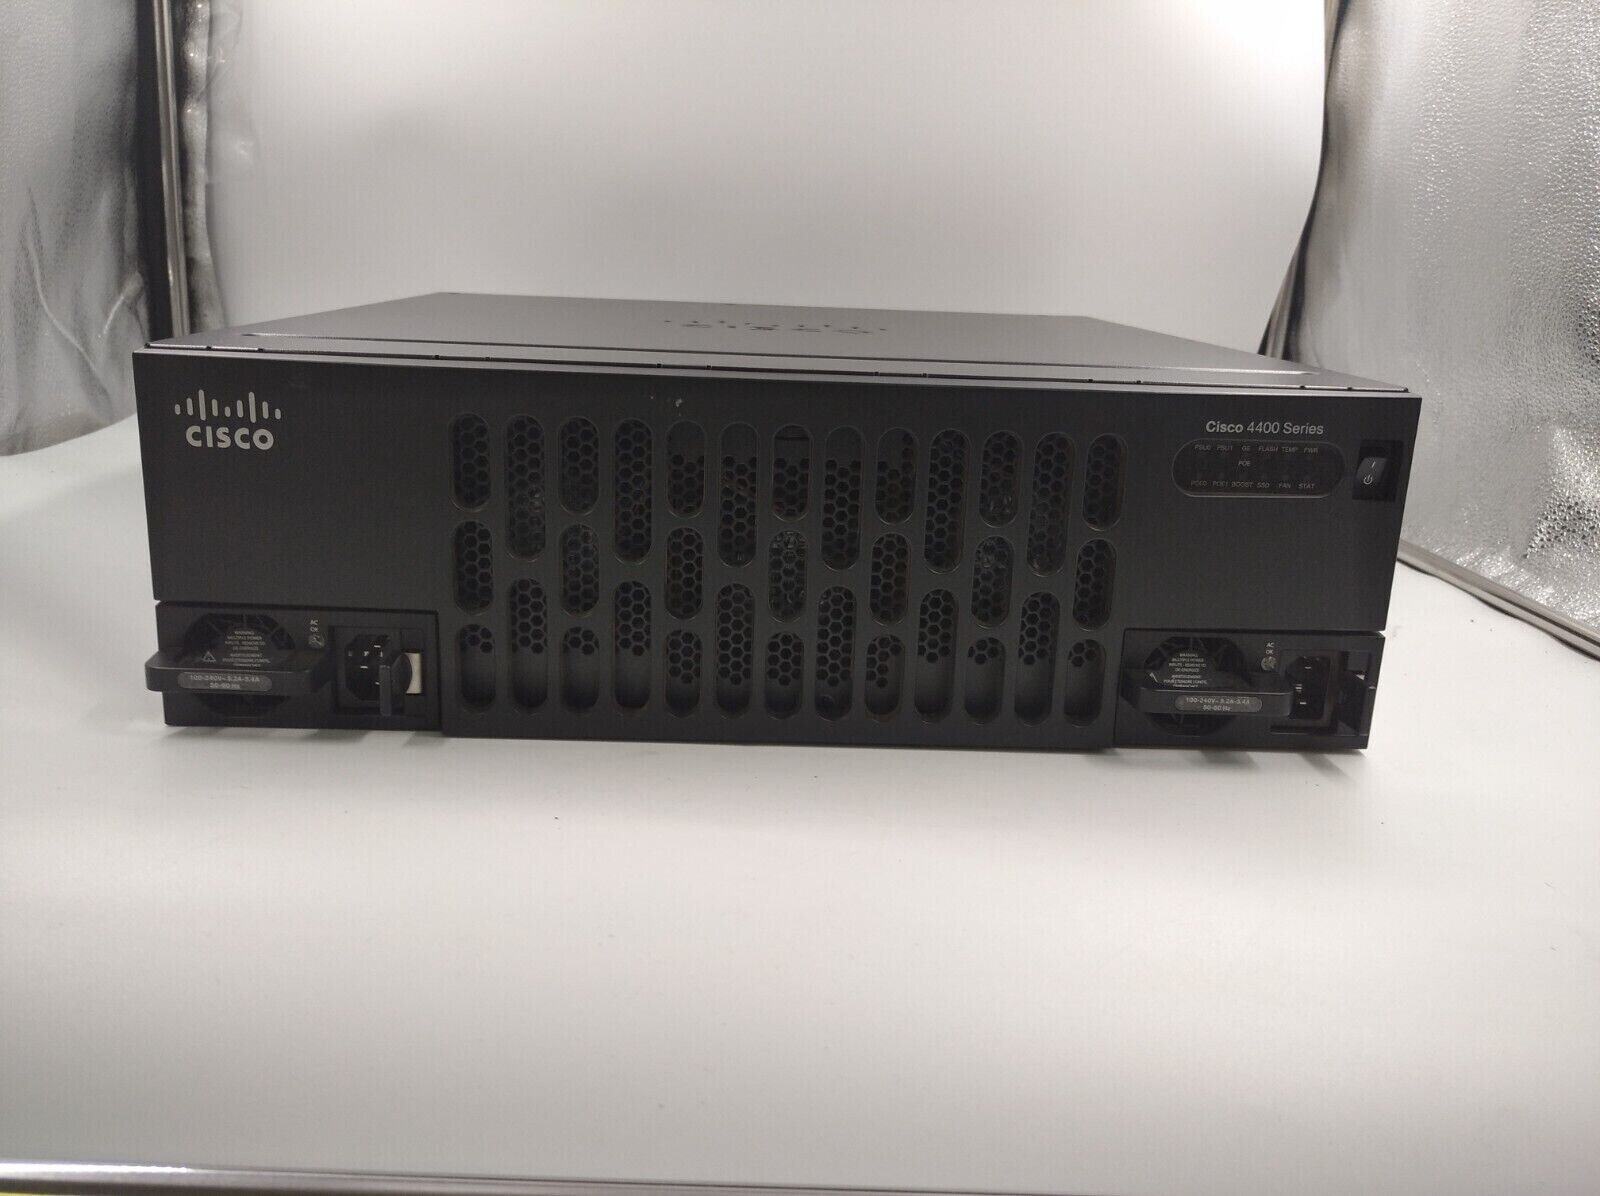 Genuine Cisco ISR4461-K9 4400 SERIES Integrated Services Router- CLEAN SERIAL